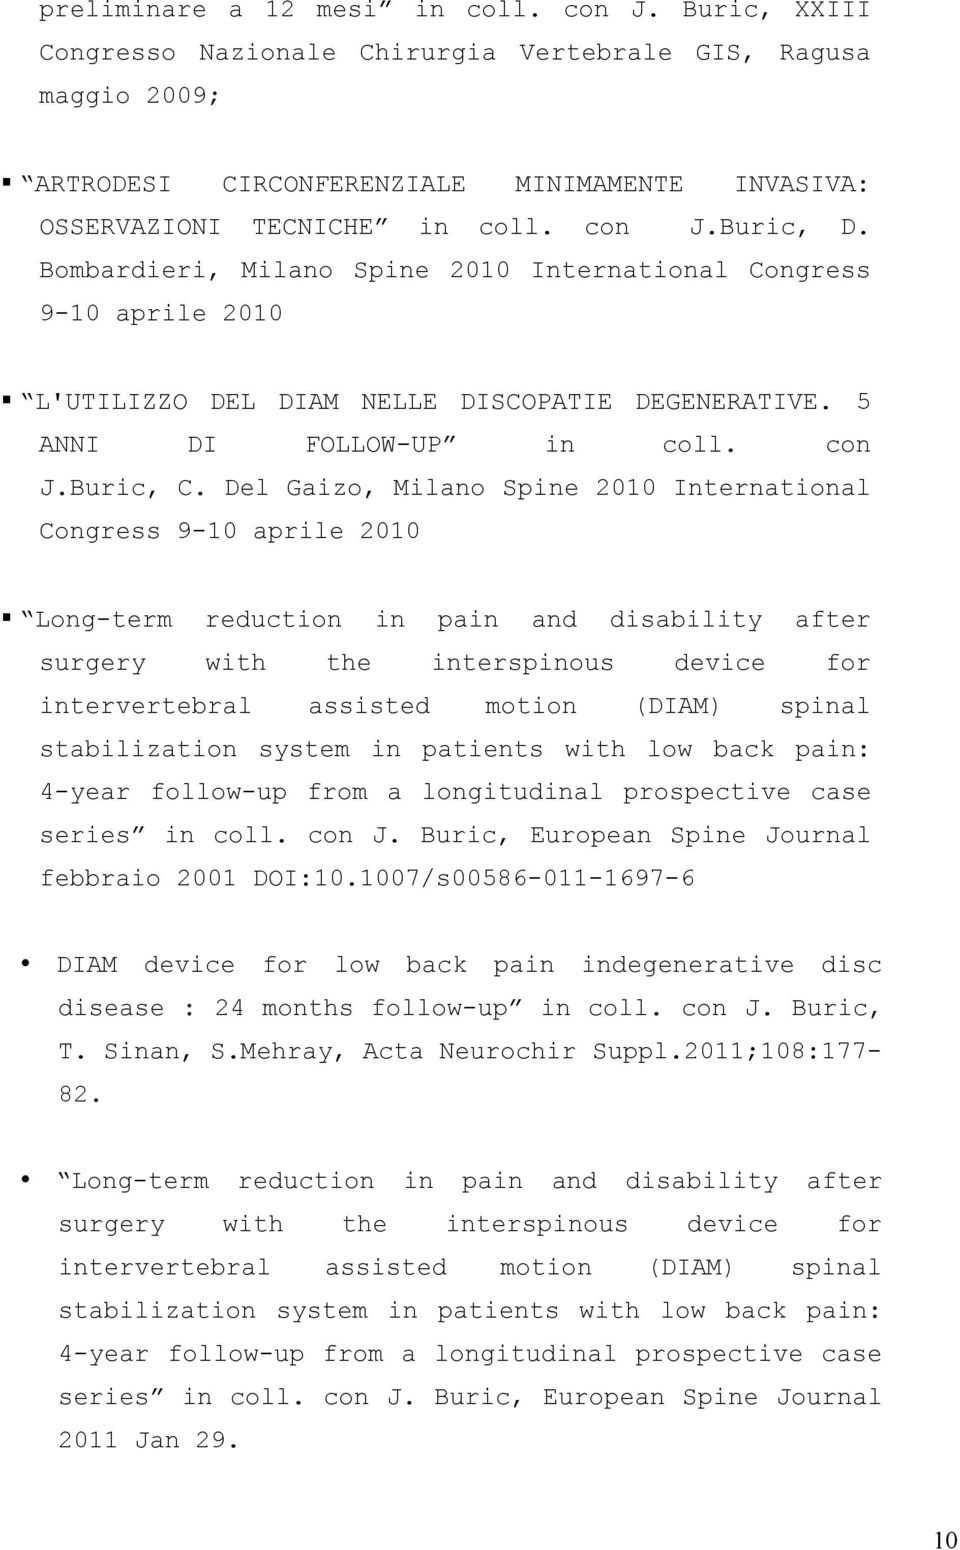 Del Gaizo, Milano Spine 2010 International Congress 9-10 aprile 2010 Long-term reduction in pain and disability after surgery with the interspinous device for intervertebral assisted motion (DIAM)